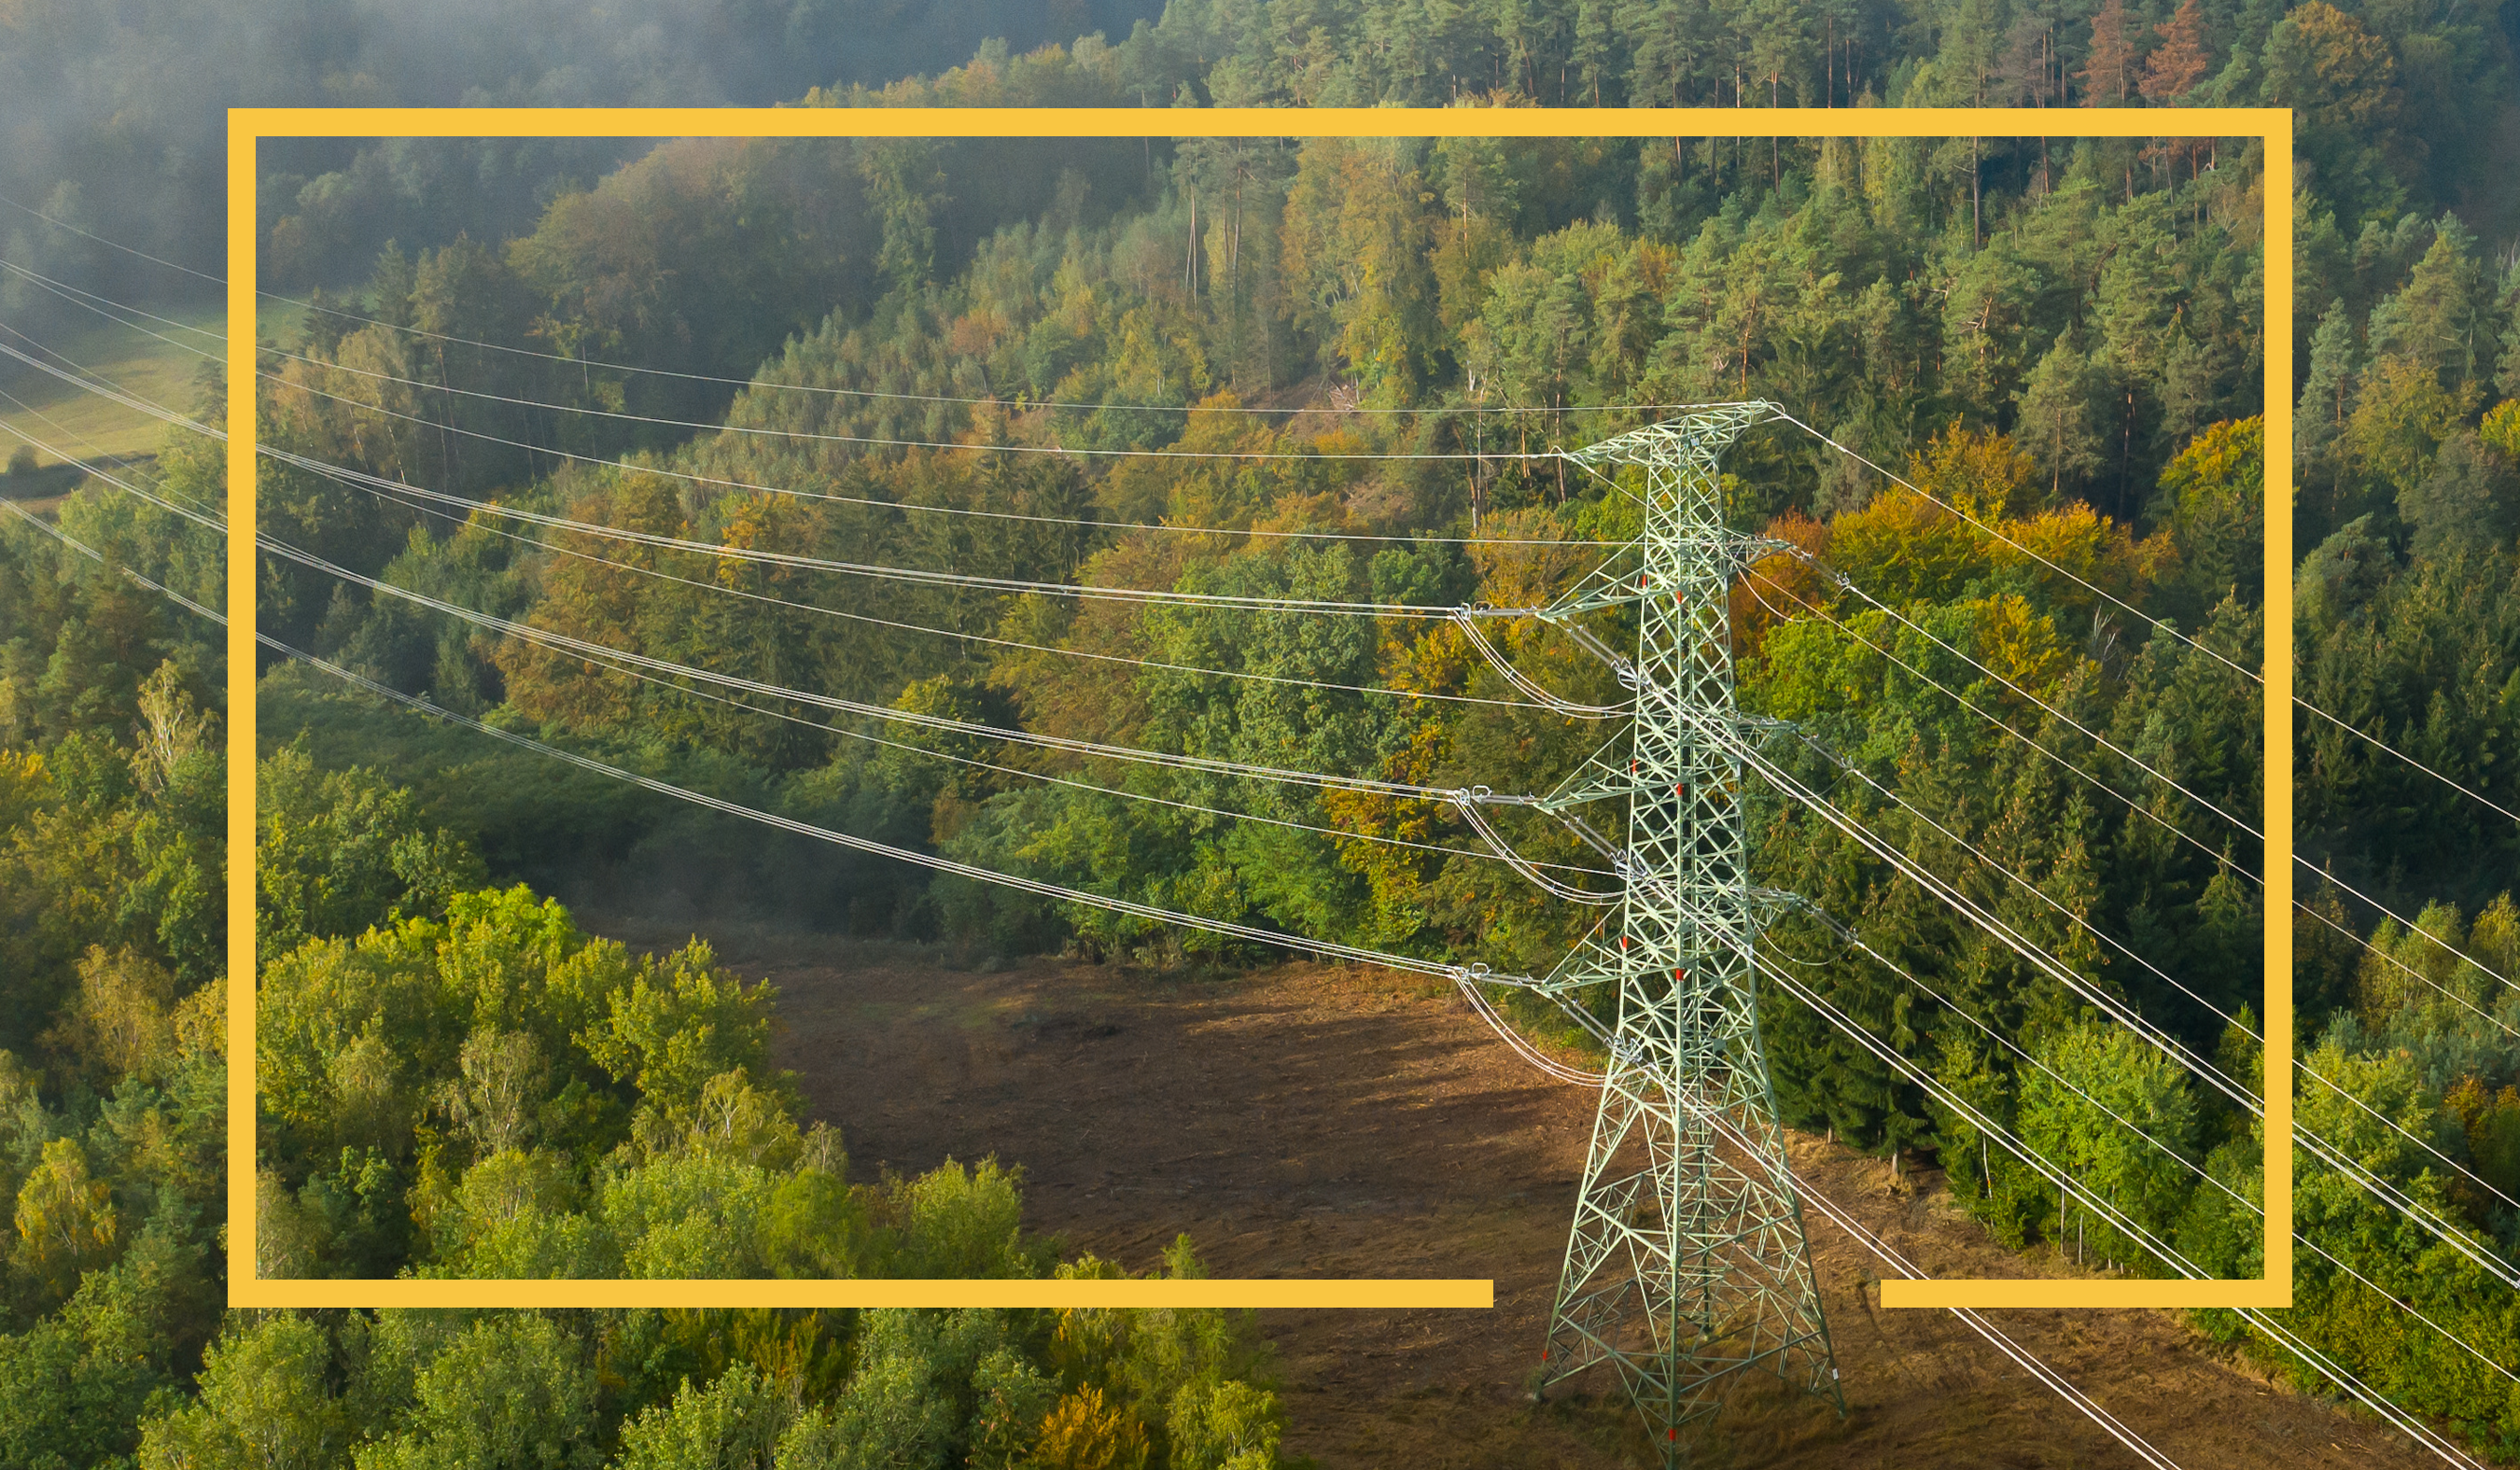 Transmission Line in wooded area